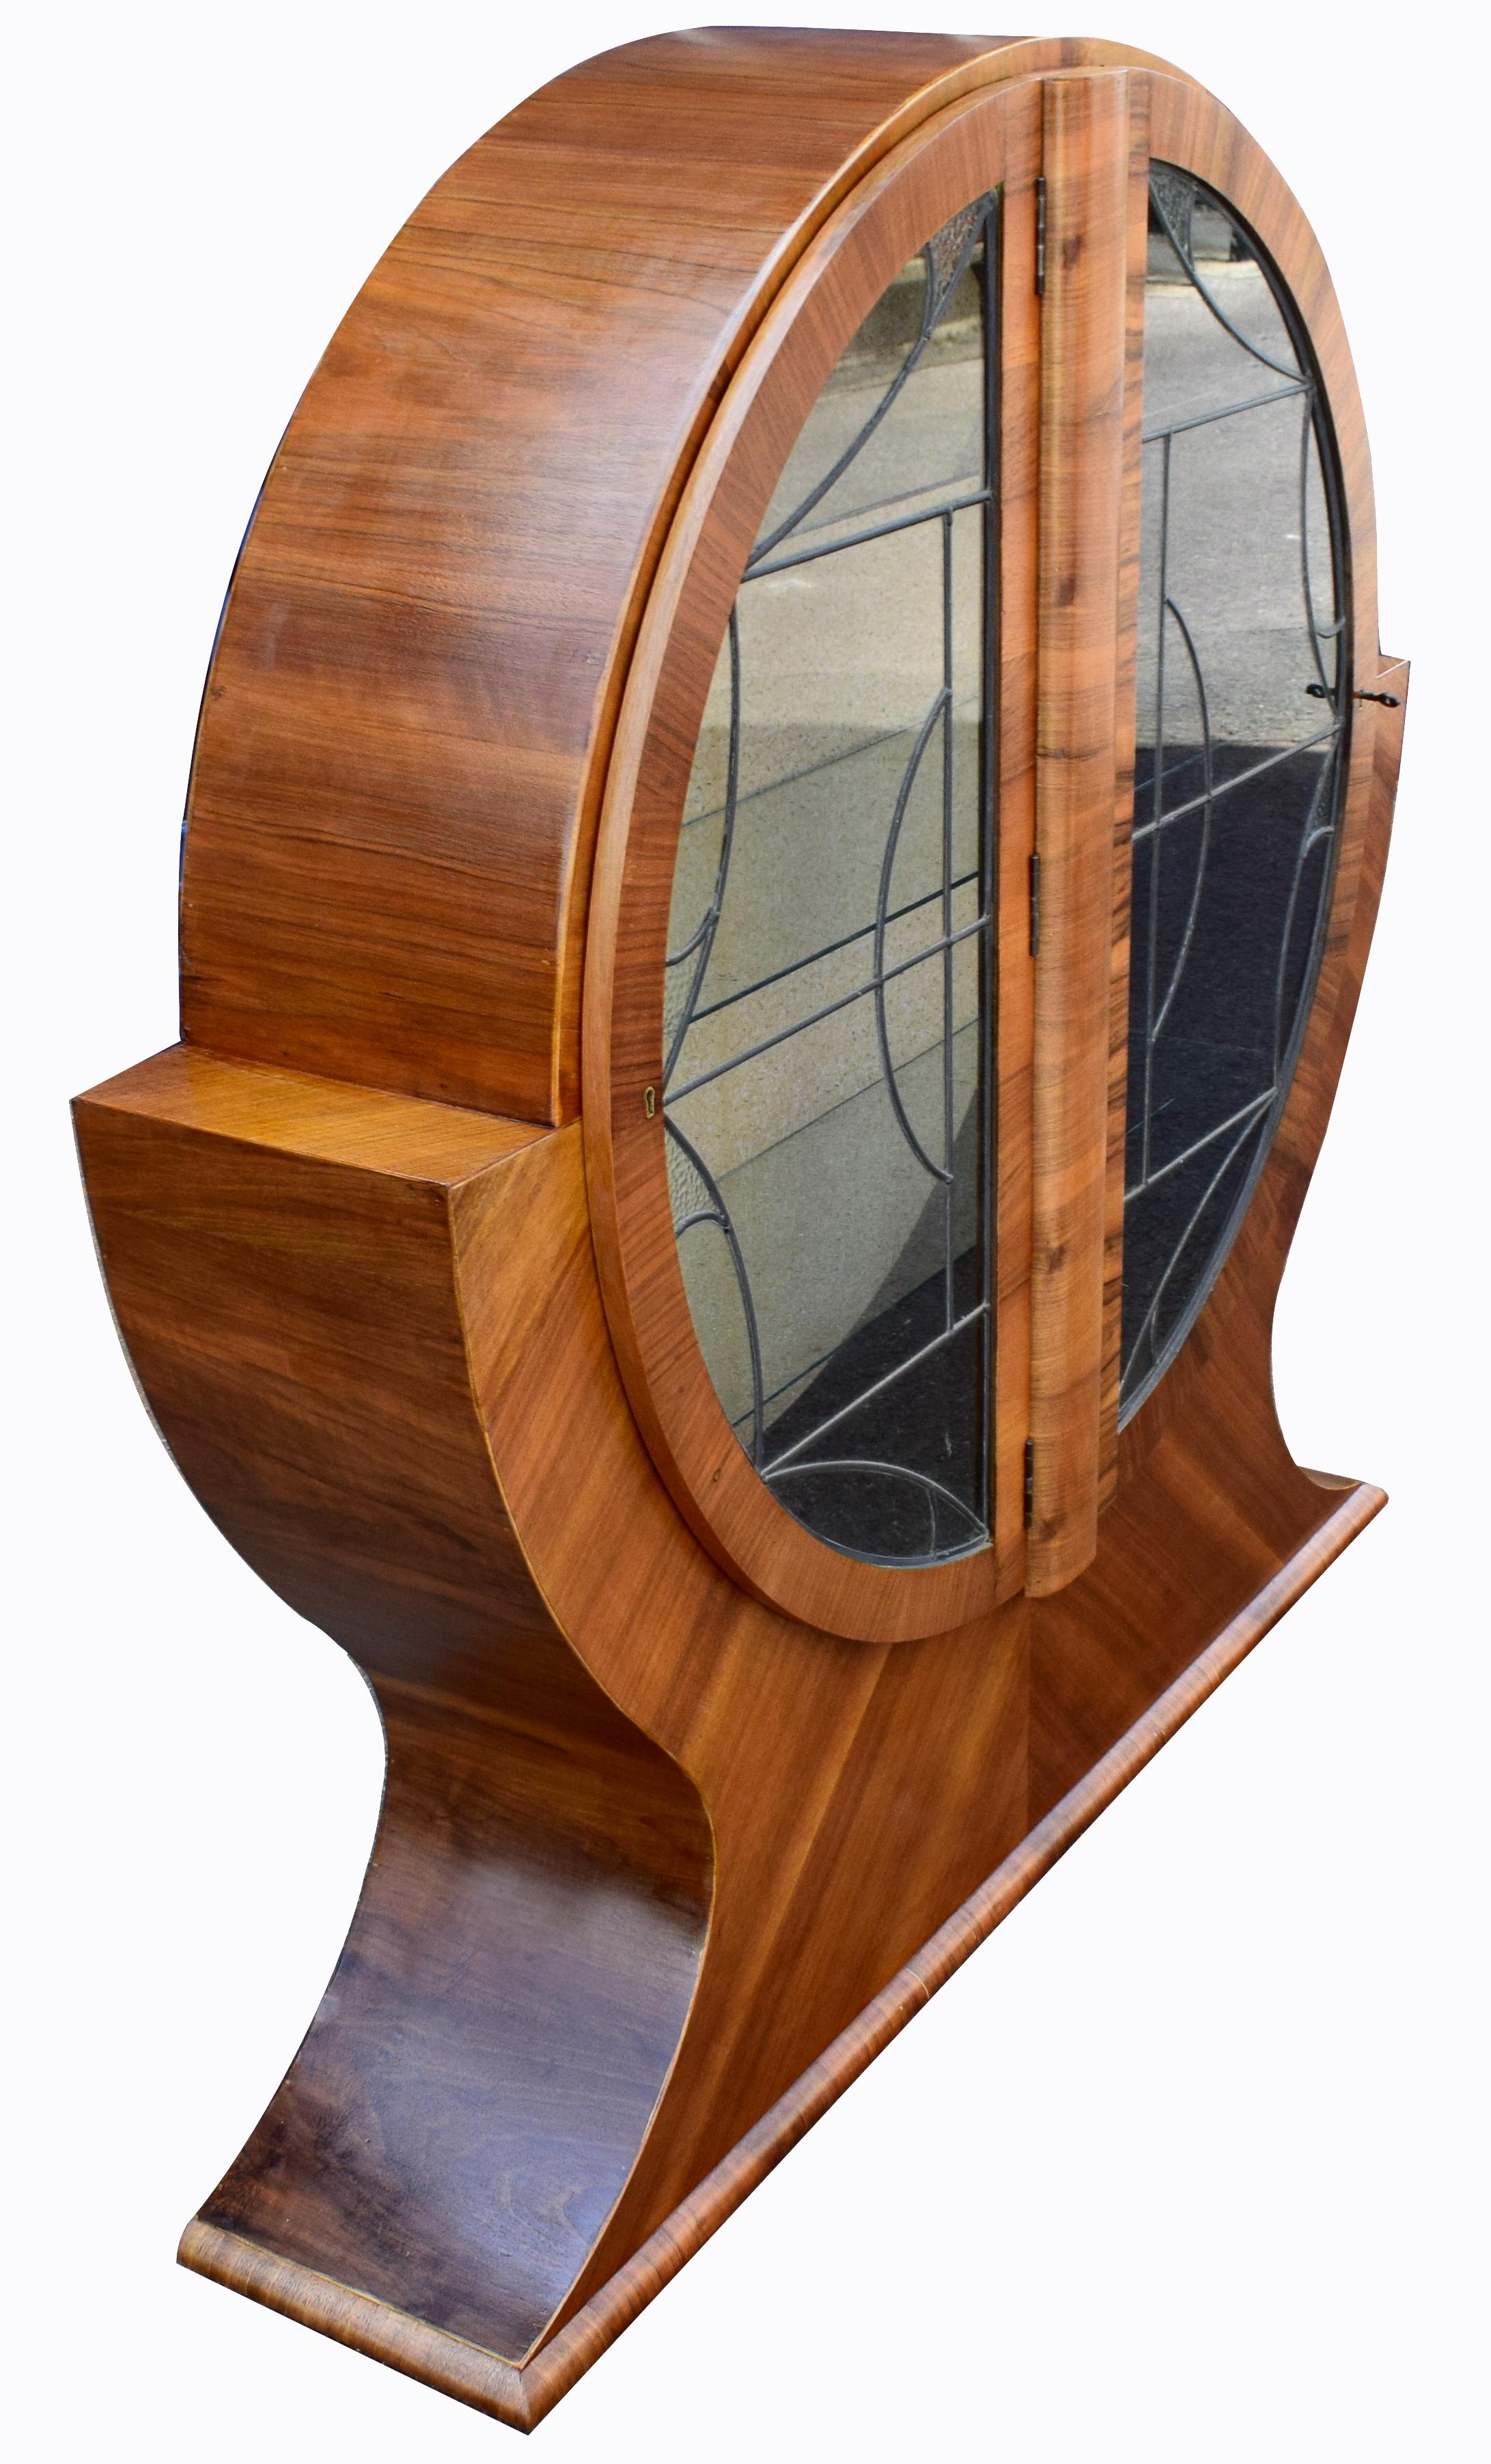 This is a superb 1930s Art Deco cabinet. This walnut cabinet is what we've chosen to call a 